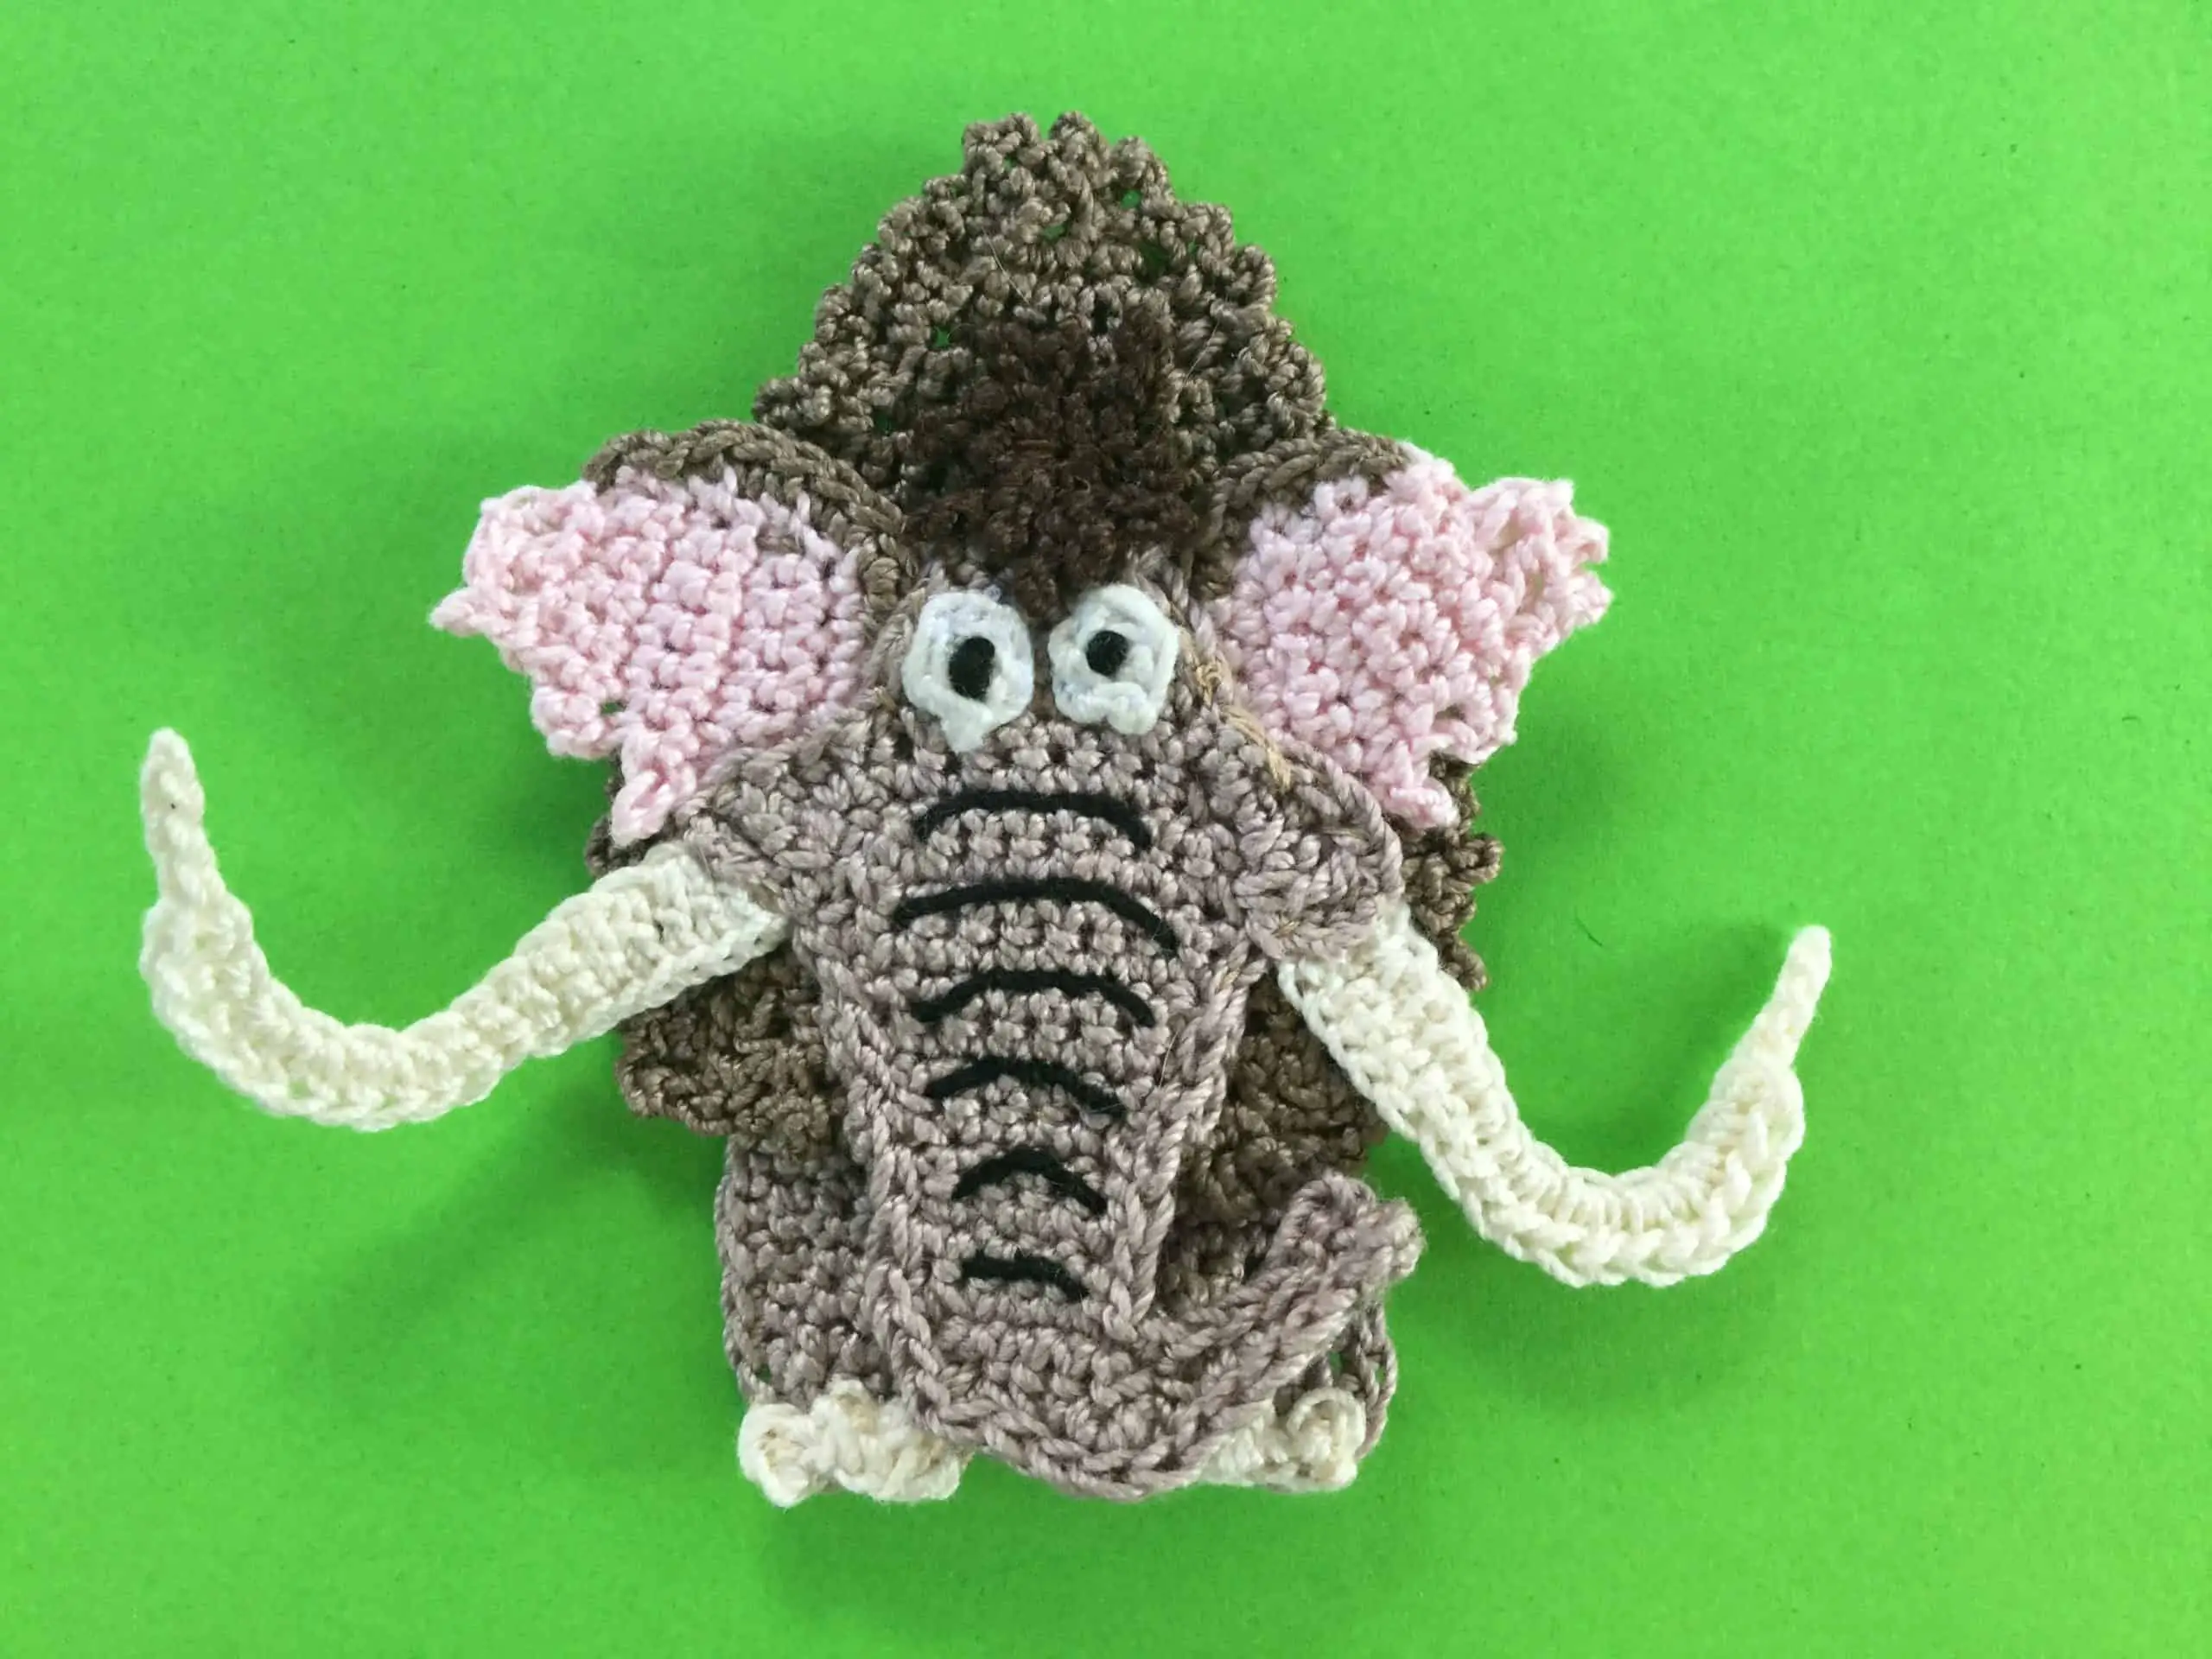 Finished crochet wooly mammoth 2 ply landscape